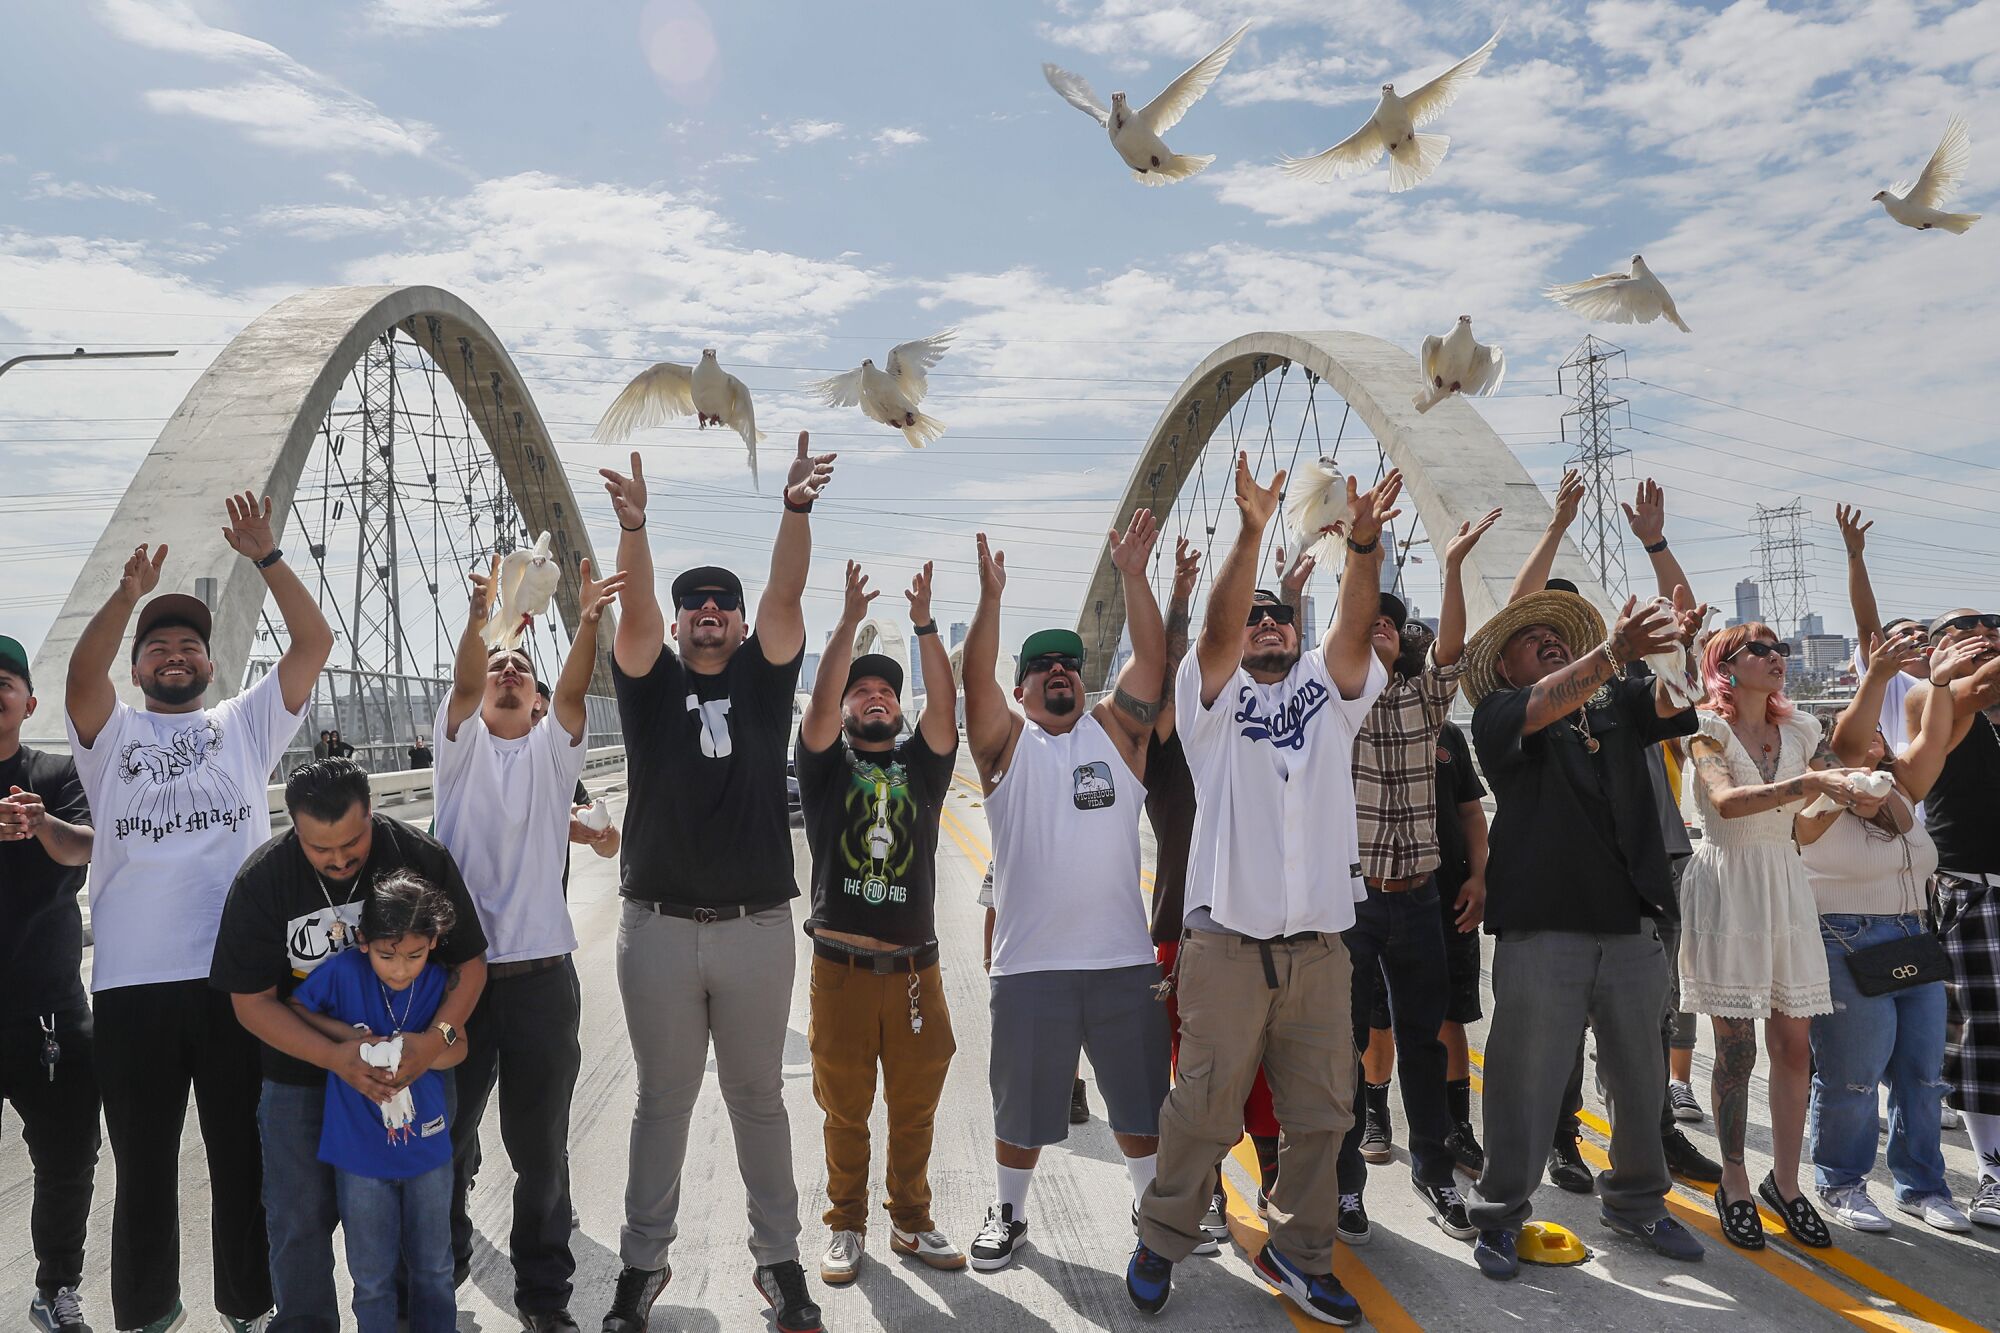 People release doves midspan to bless the 6th Street Viaduct